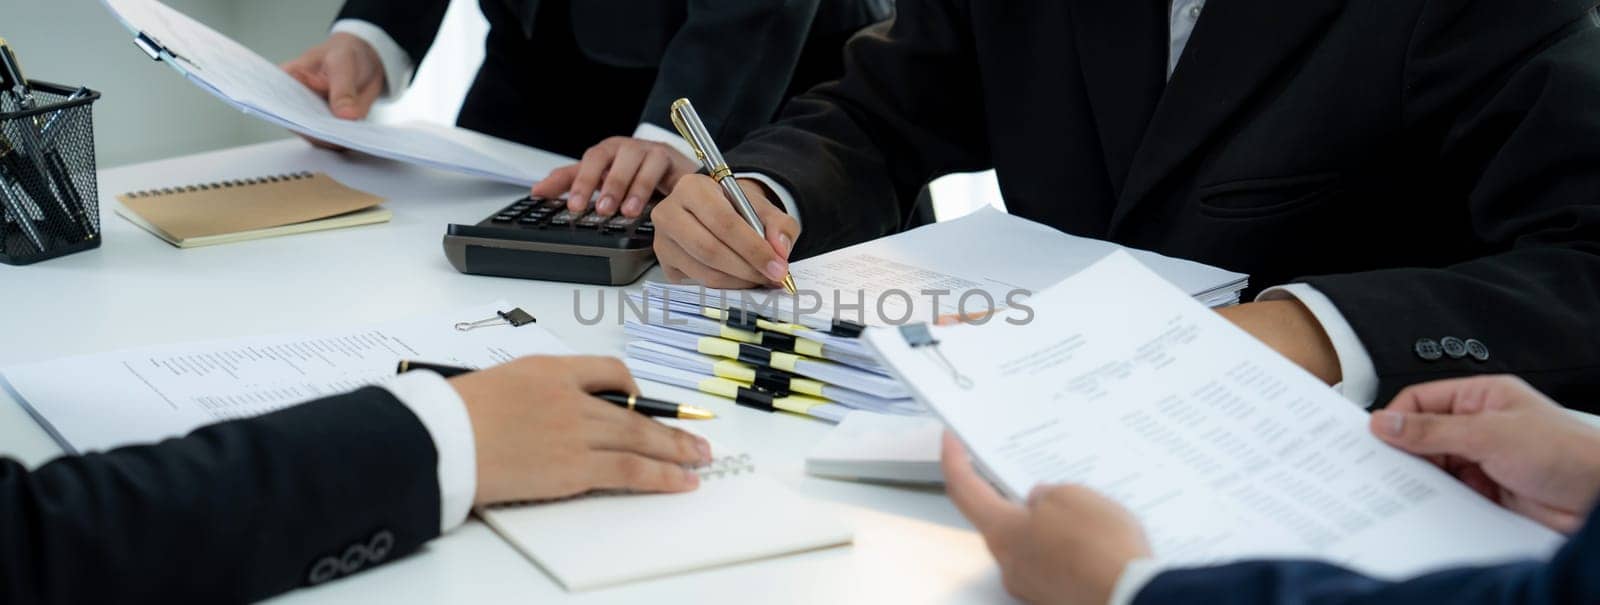 Corporate accountant team use calculator to calculate financial report. Shrewd by biancoblue